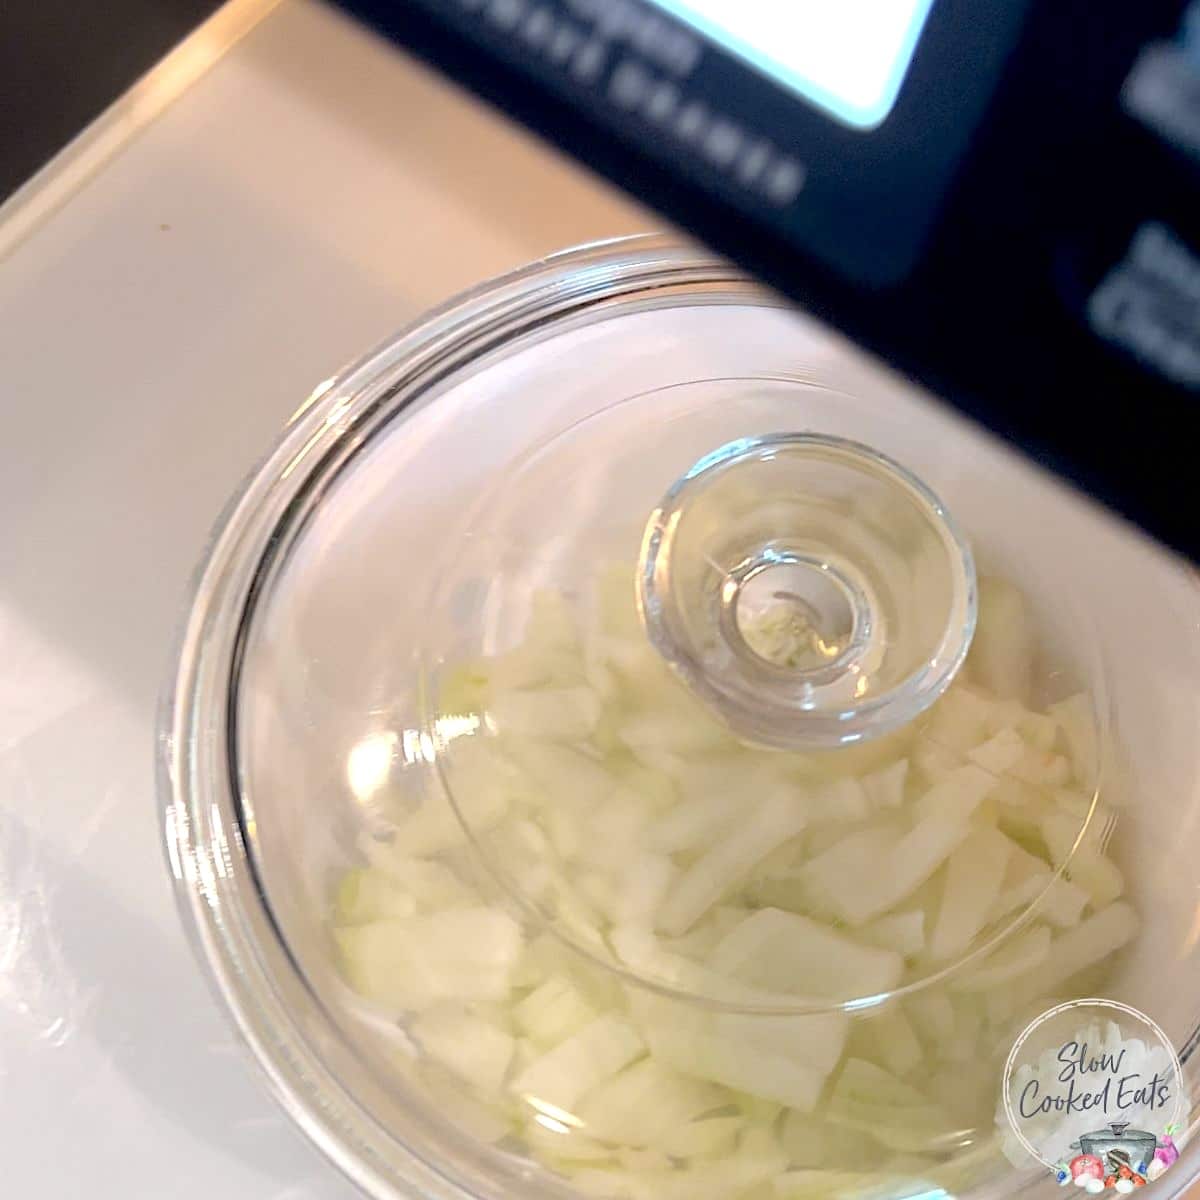 Microwaving the onion in a white lidded dish to soften.